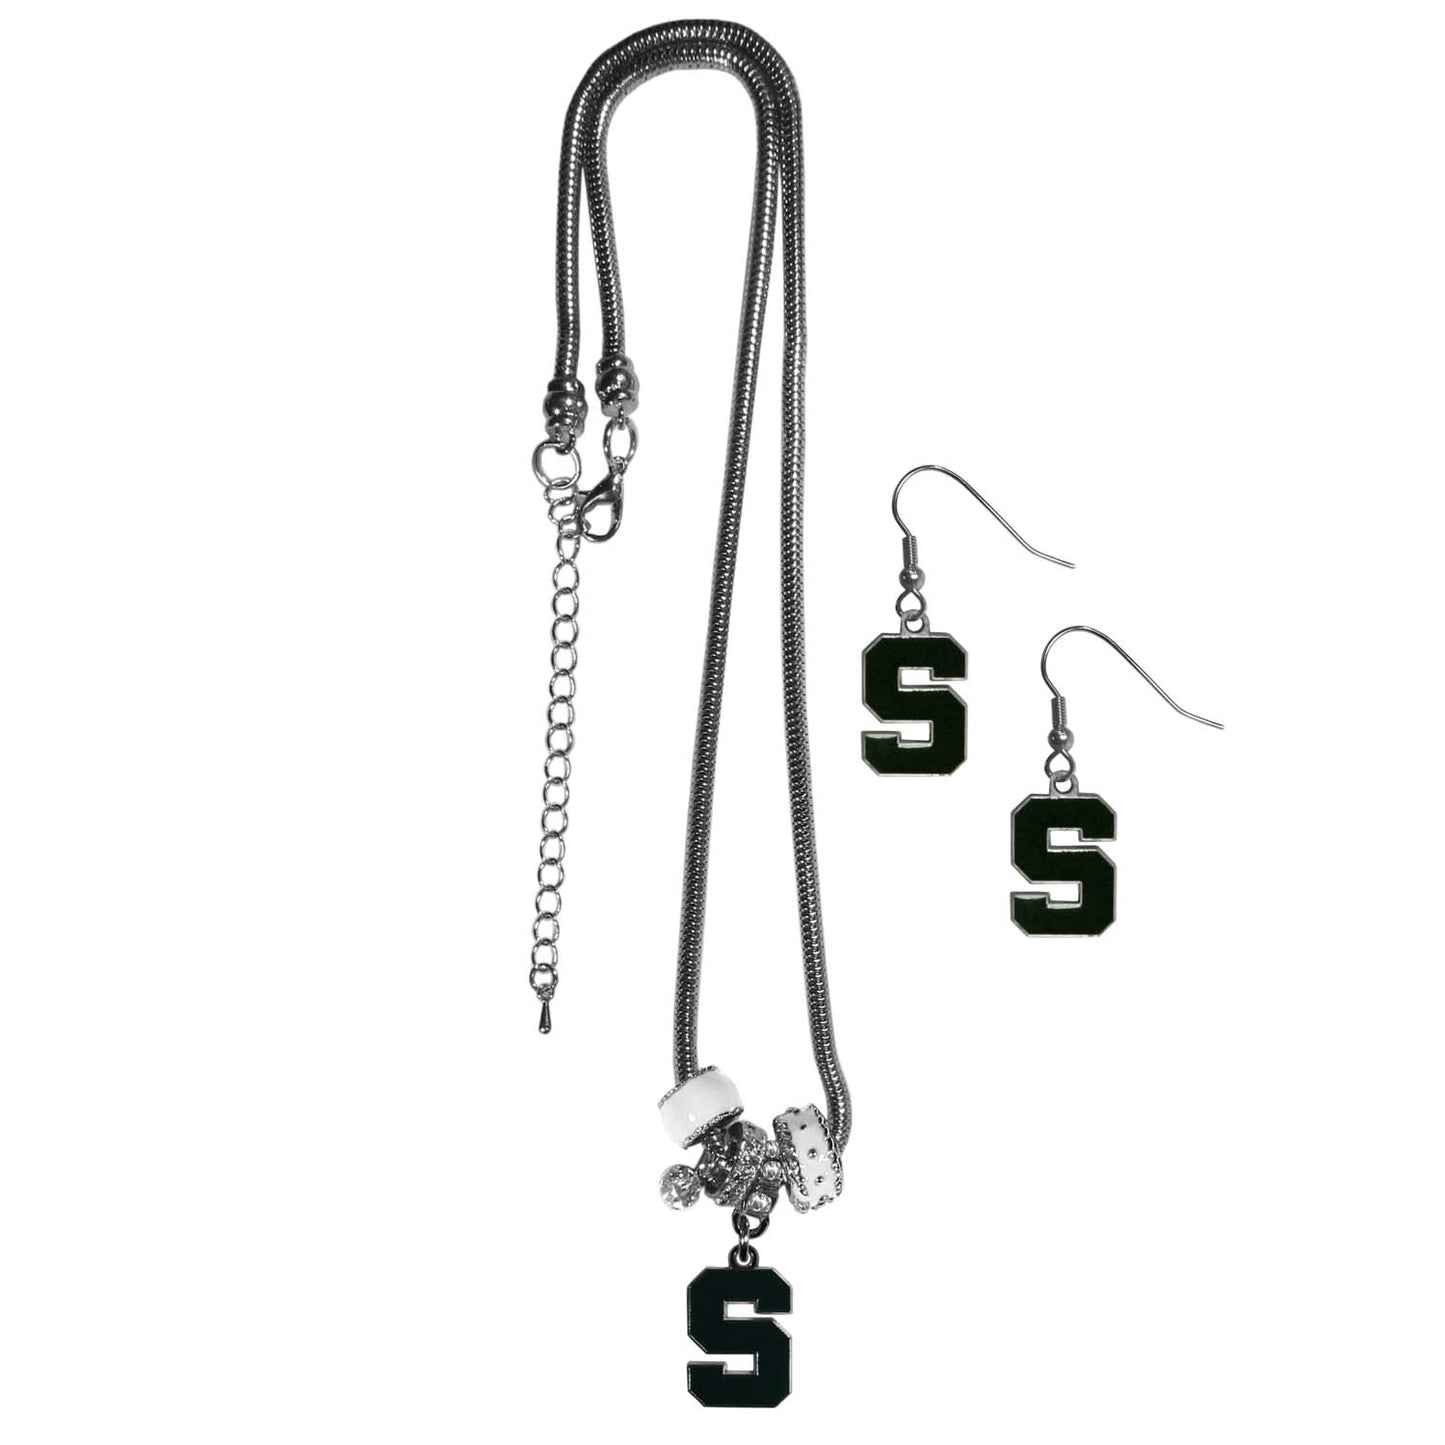 Michigan State Spartans Collegiate Game Day Necklace and Earrings - Silver